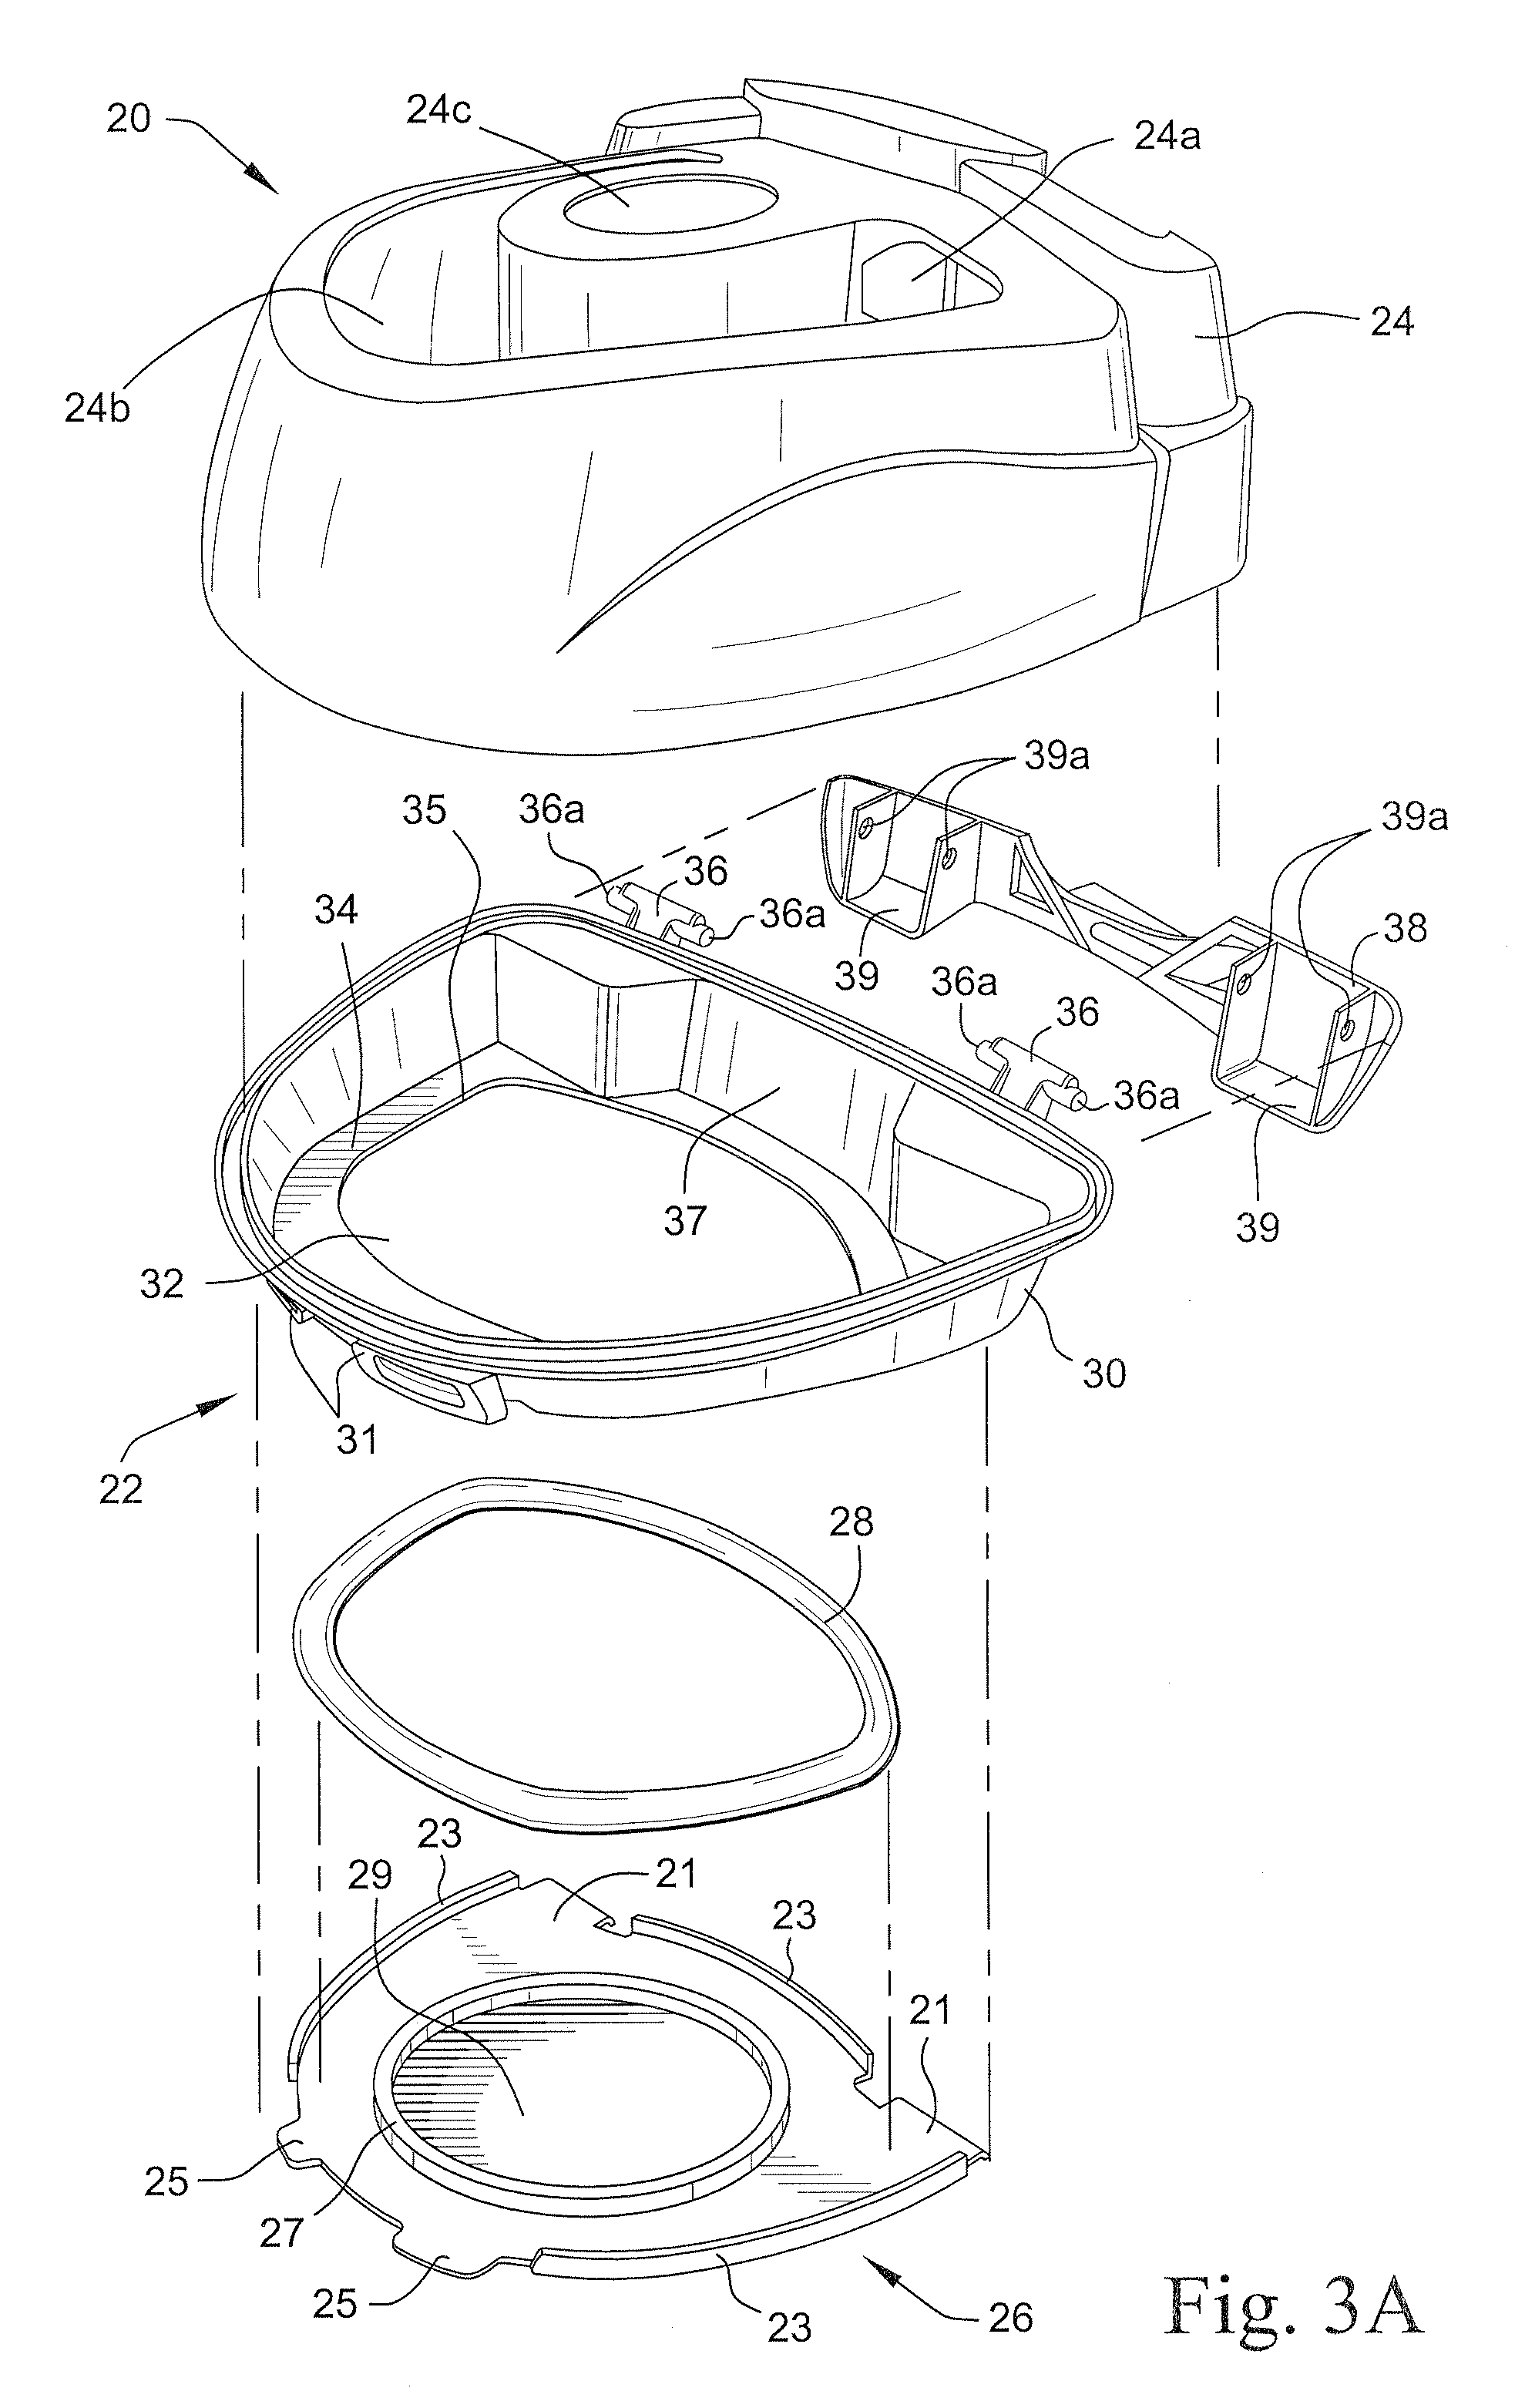 Tub for humidifier